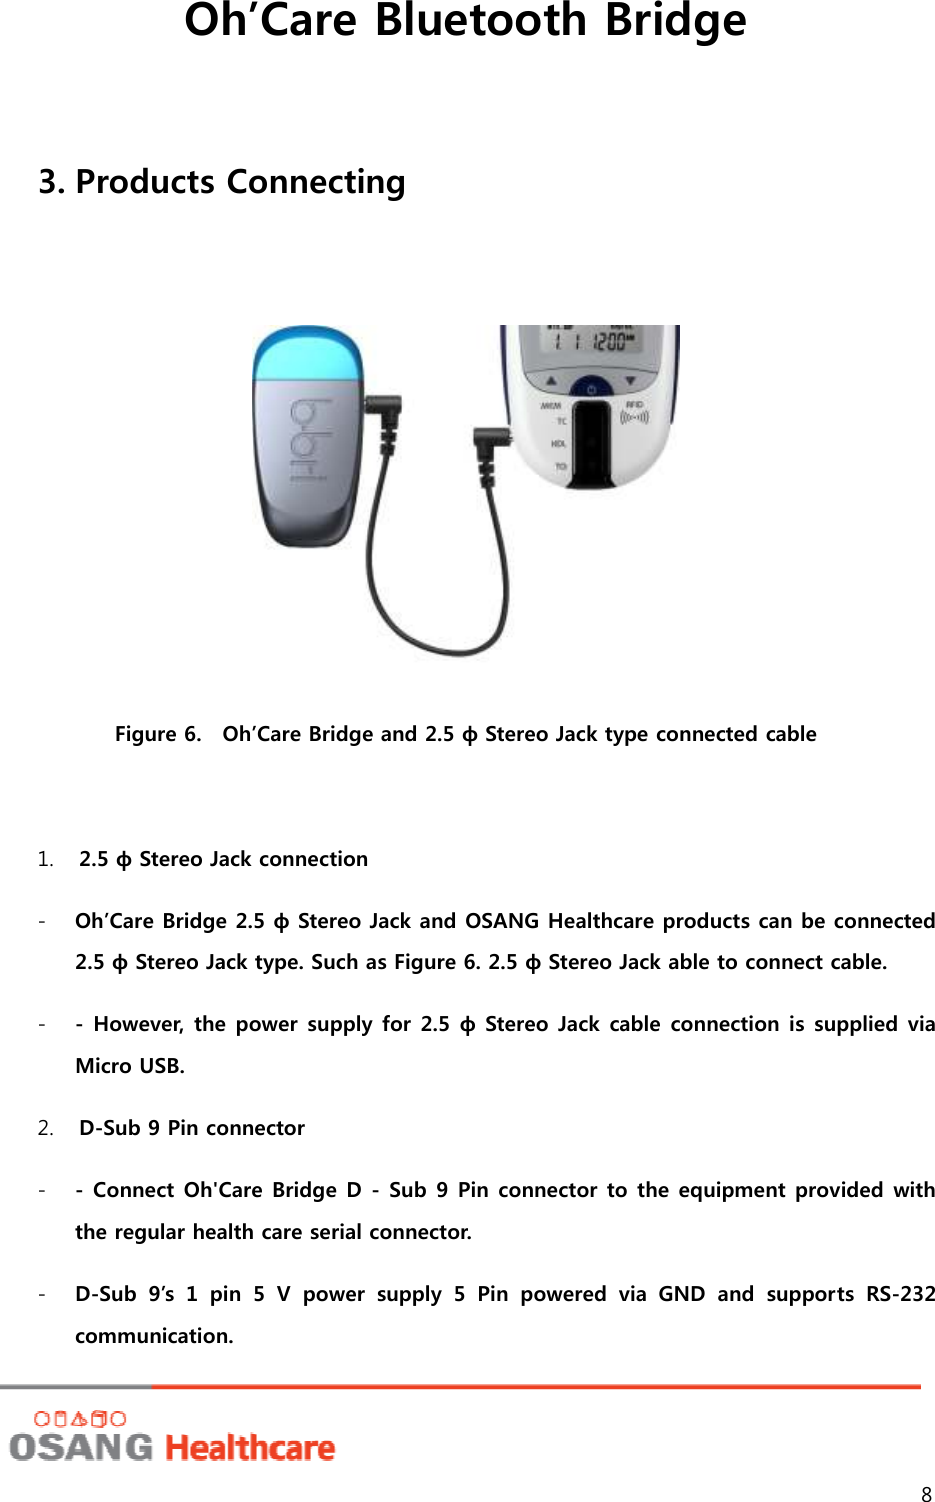 Oh’Care Bluetooth Bridge 8  3. Products Connecting   Figure 6.    Oh’Care Bridge and 2.5 ф Stereo Jack type connected cable    1. 2.5 ф Stereo Jack connection - Oh’Care Bridge 2.5 ф Stereo Jack and OSANG Healthcare products can be connected 2.5 ф Stereo Jack type. Such as Figure 6. 2.5 ф Stereo Jack able to connect cable. - - However, the power  supply for  2.5  ф Stereo Jack cable  connection is supplied  via Micro USB. 2. D-Sub 9 Pin connector - - Connect Oh&apos;Care Bridge D - Sub 9 Pin connector to the equipment provided with the regular health care serial connector. - D-Sub  9’s  1  pin  5  V  power  supply  5  Pin  powered  via  GND  and  supports  RS-232 communication. 